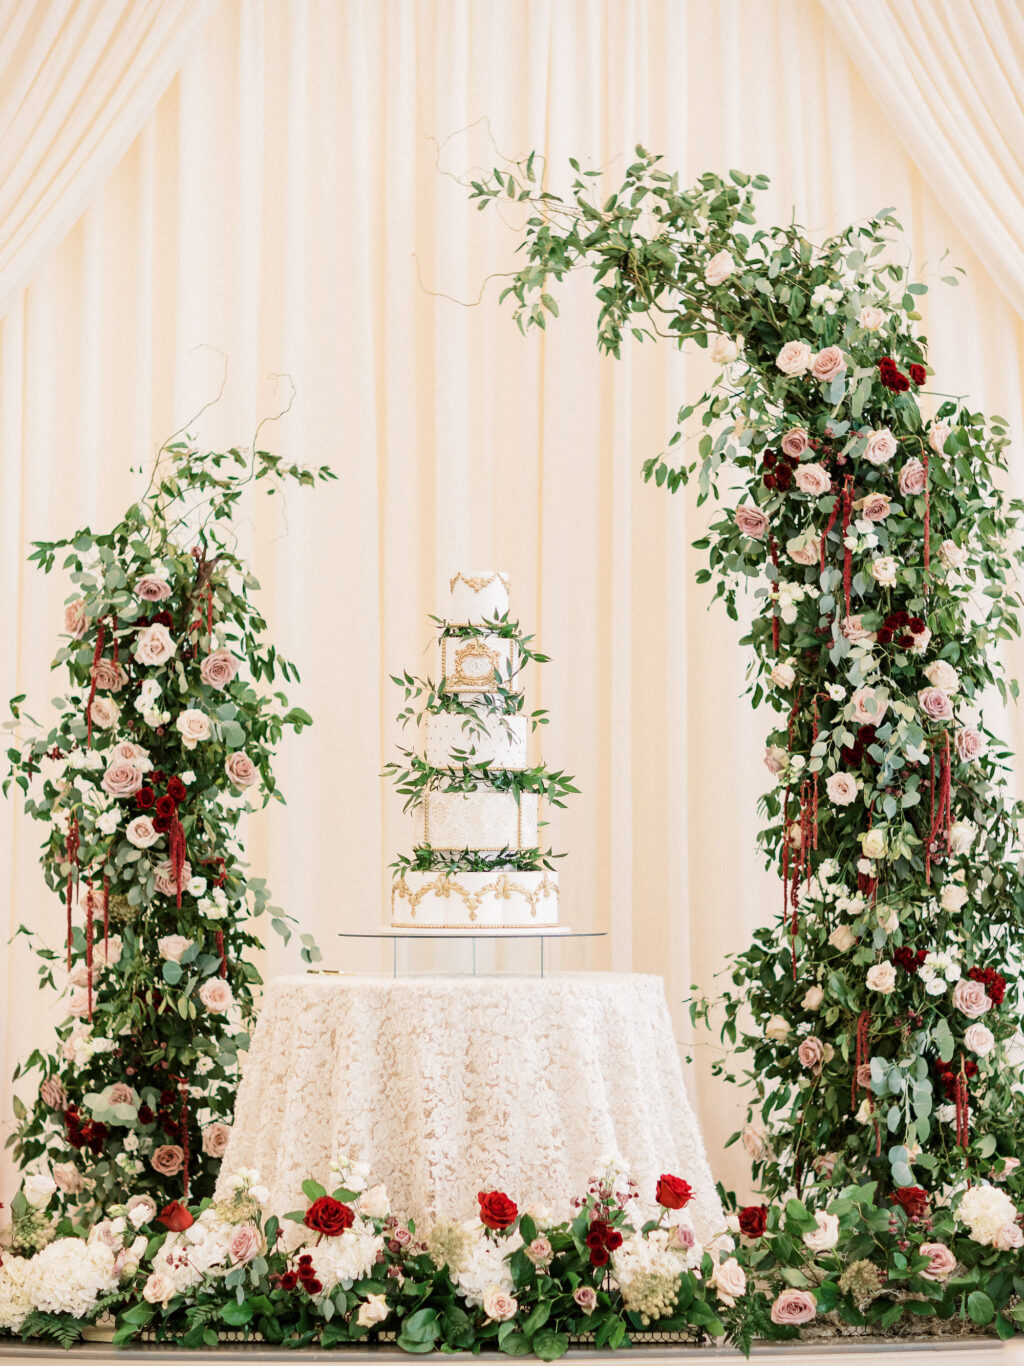 Elegant Royal Glam Gatsby Wedding Reception Decor, Lush Greenery, Mauve, Blush Pink, White and Burgundy Roses, Red Hanging Amaranthus Floral Pillars, Five Tier White and Gold Wedding Cake with Greenery Leaves | Tampa Bay Wedding Cake The Artistic Whisk | St. Pete Wedding Planner John Campbell Weddings